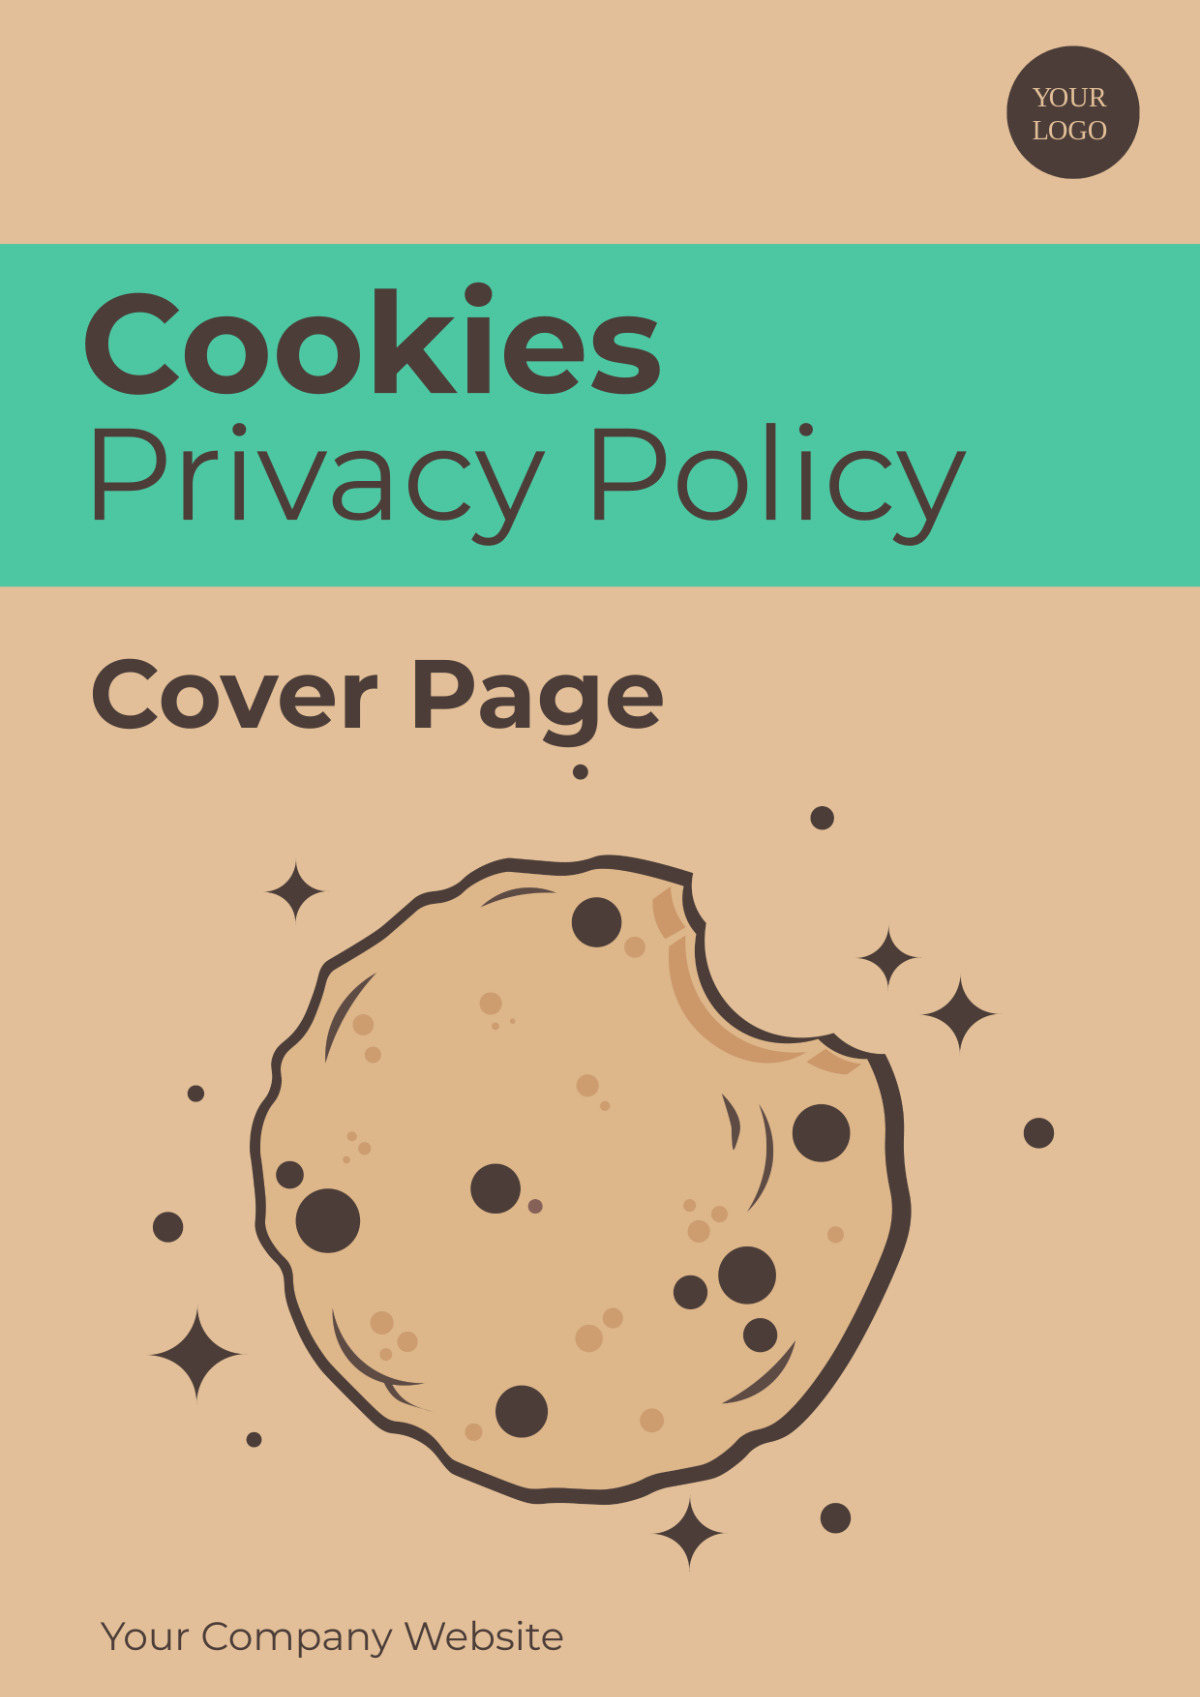 Cookies Privacy Policy Cover Page